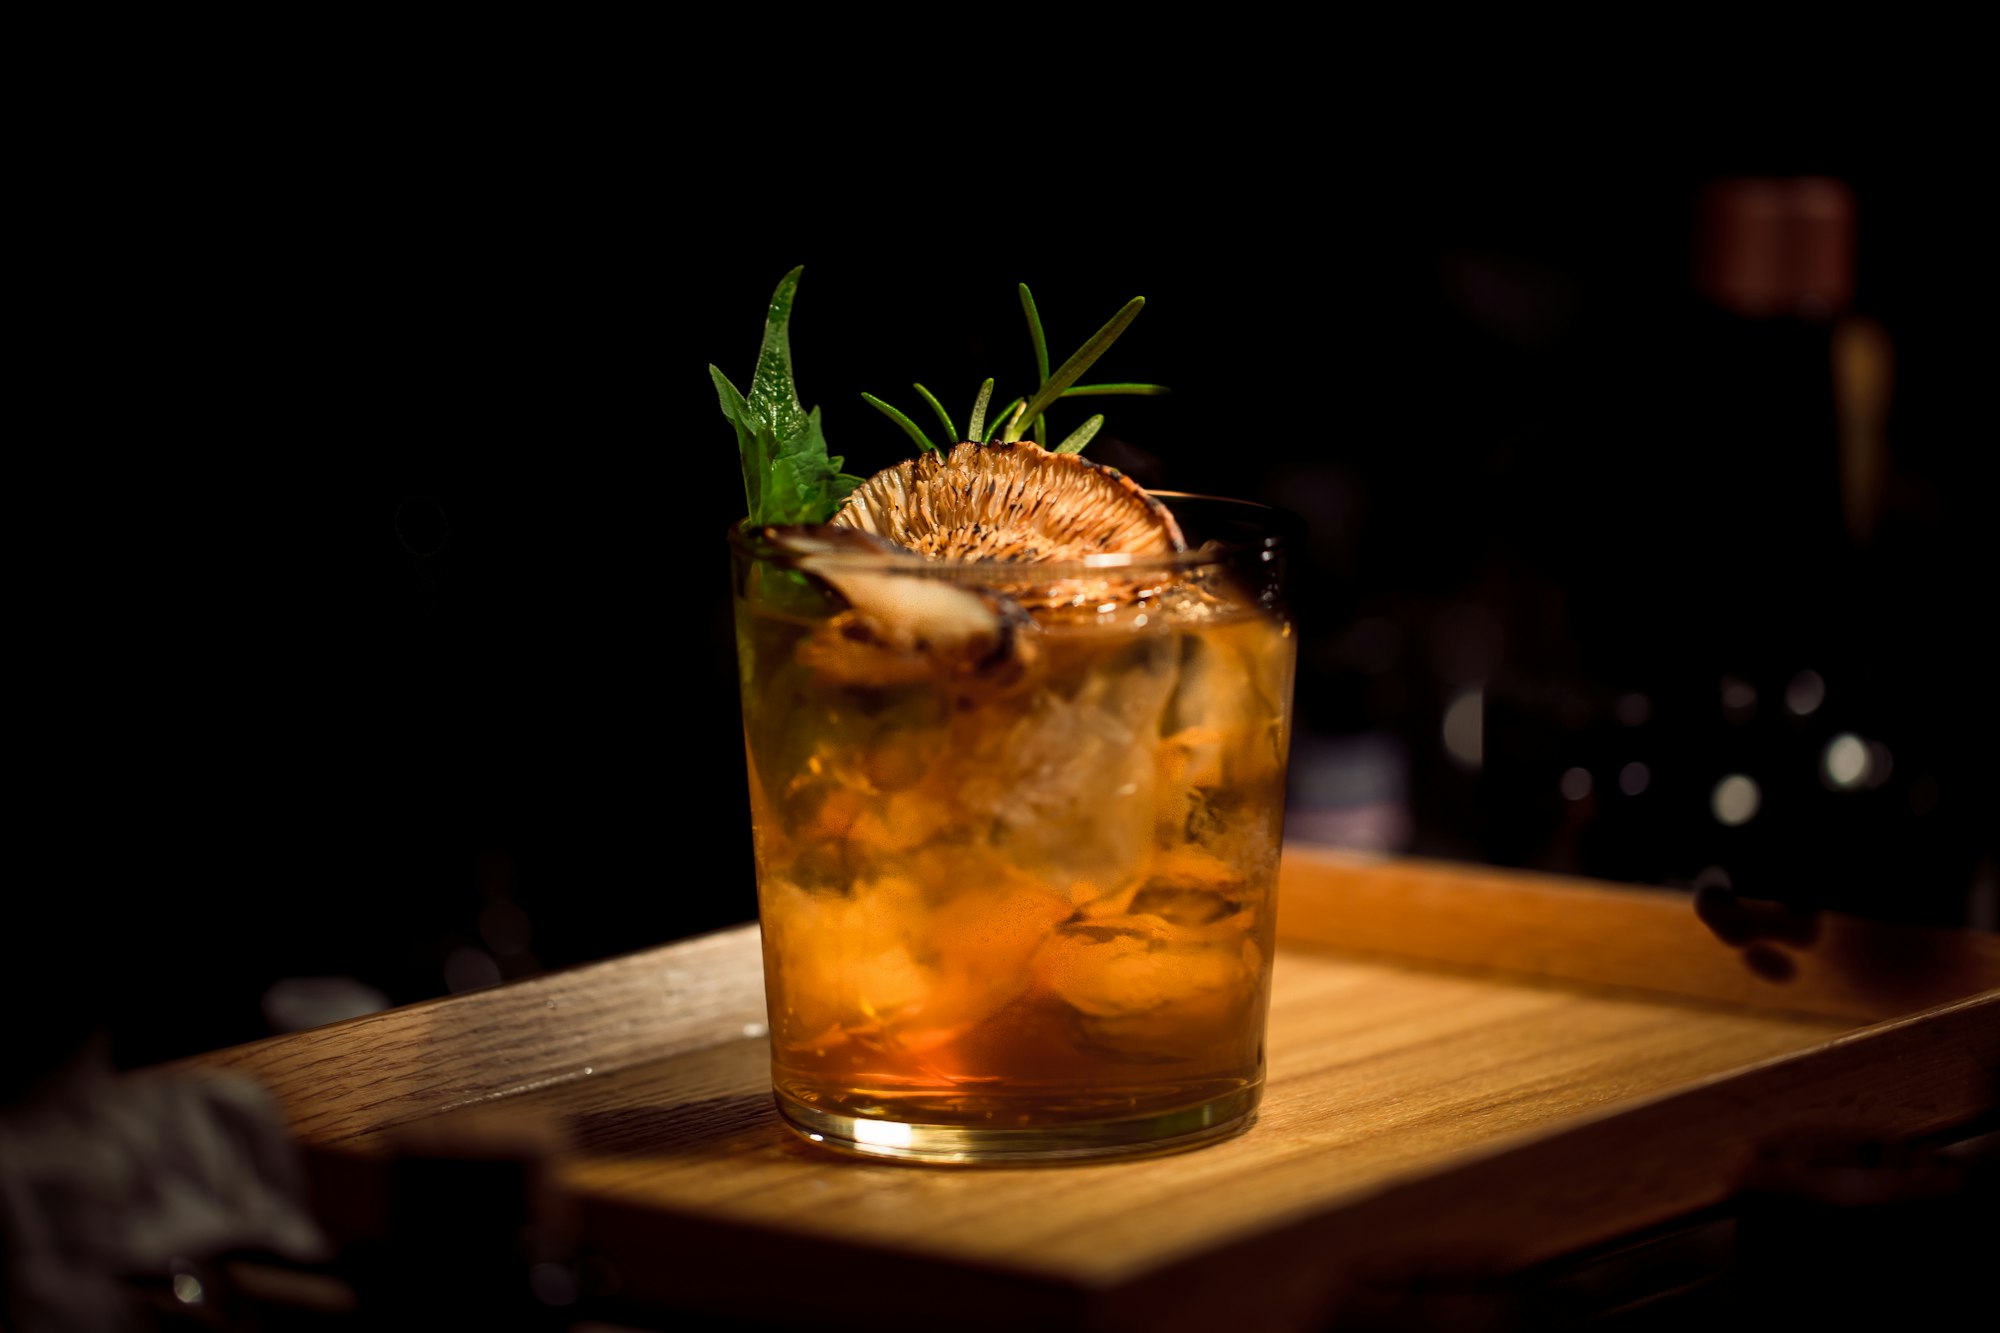 This mushroom cocktail was created by Tomo, an overwhelmingly creative mixologist in Kyoto. Step in his well-lit eight-person bar and take a seat.